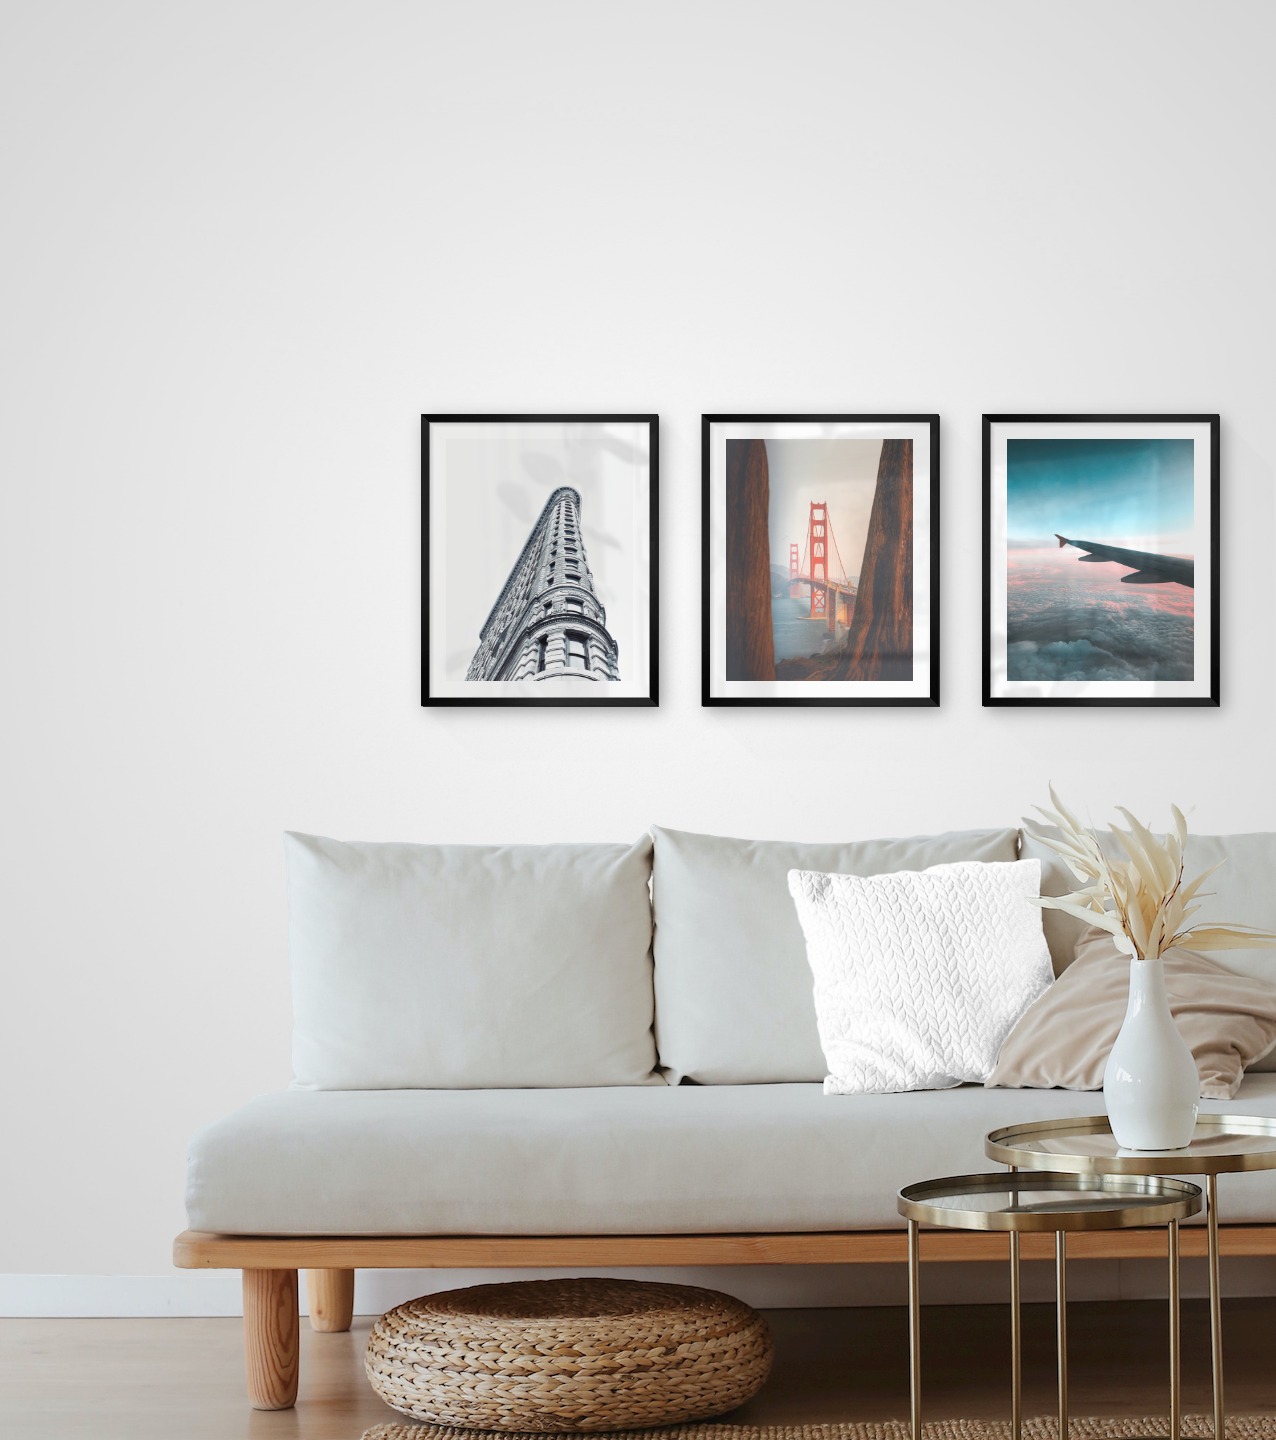 Gallery wall with picture frames in black in sizes 40x50 with prints "Gray building", "Golden Gate Bridge" and "Above the clouds"